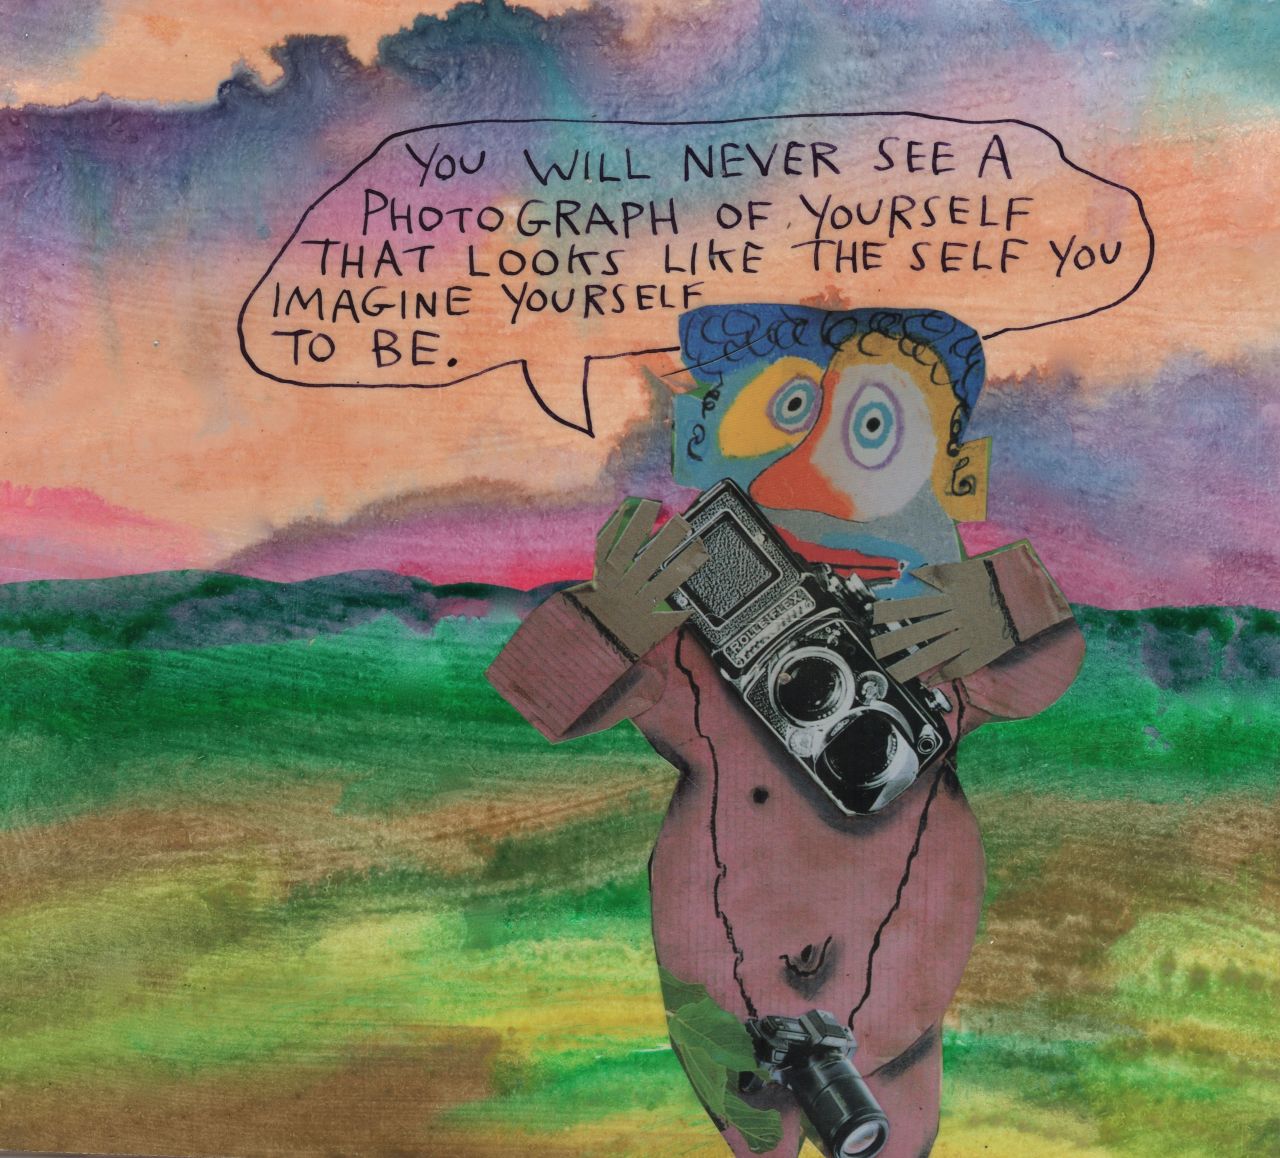 Feature image courtesy aphorist and artist Michael Lipsey stoicmike.tumblr.com